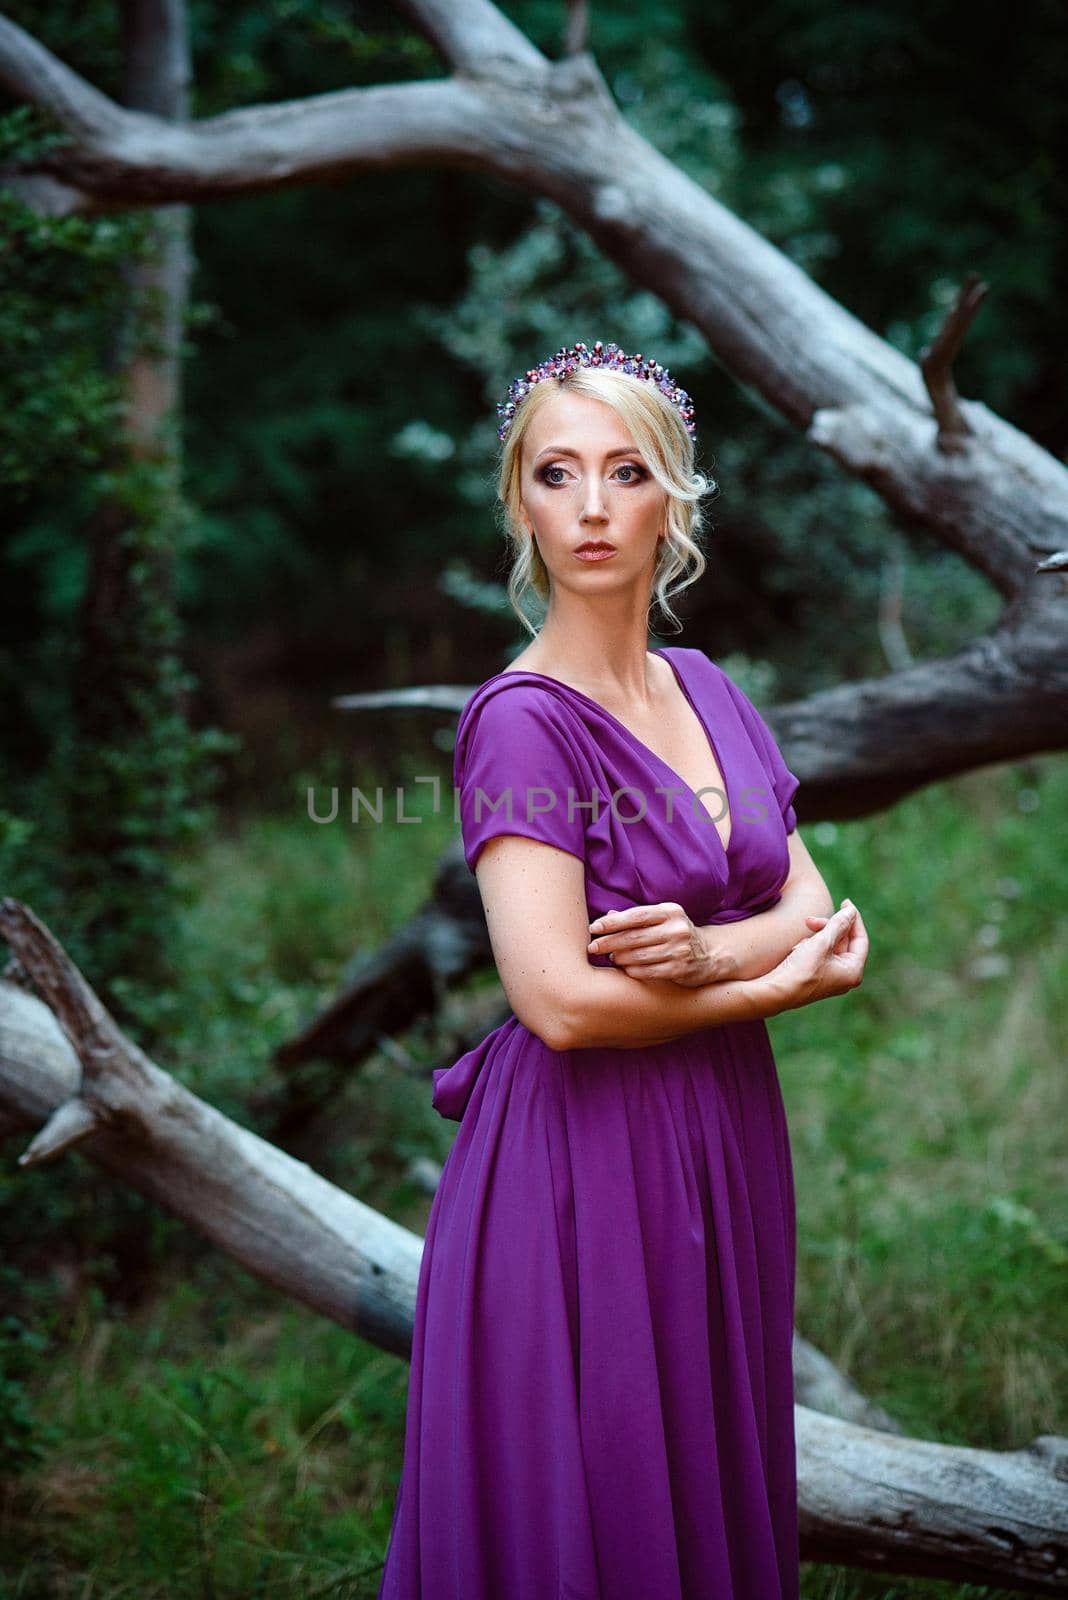 Girl model blonde in a lilac dress with a bouquet by Andreua